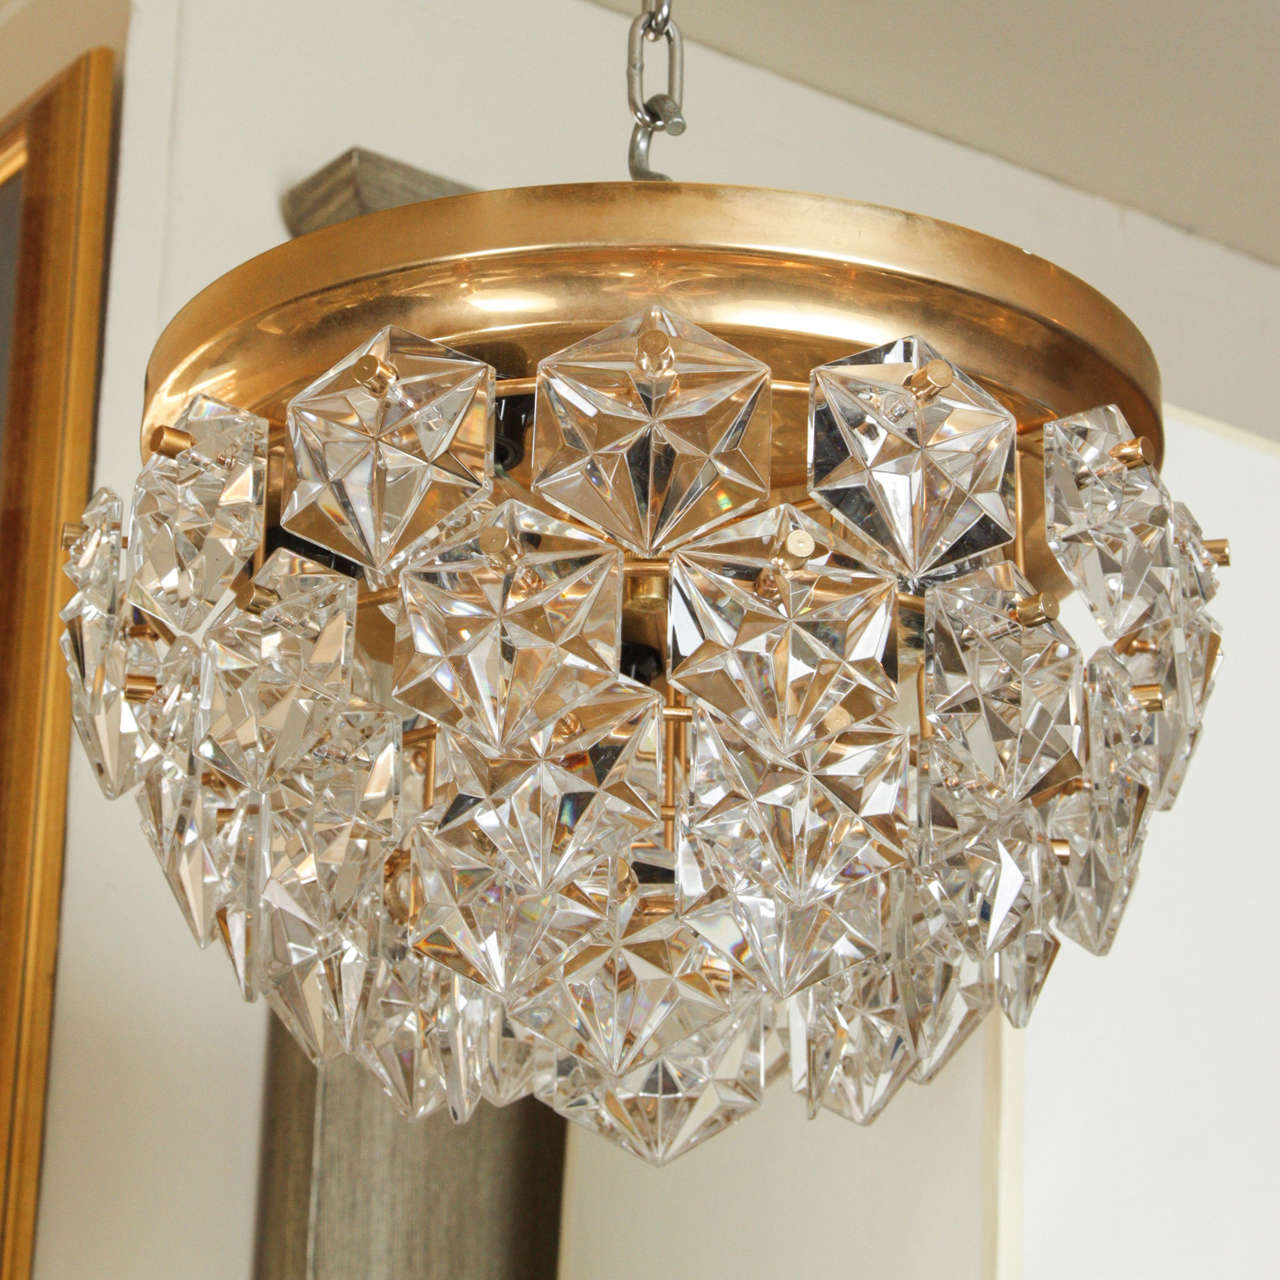 Glamorous Kinkeldey flush mount chandelier in a polished gold / brass finish with faceted crystal elements.